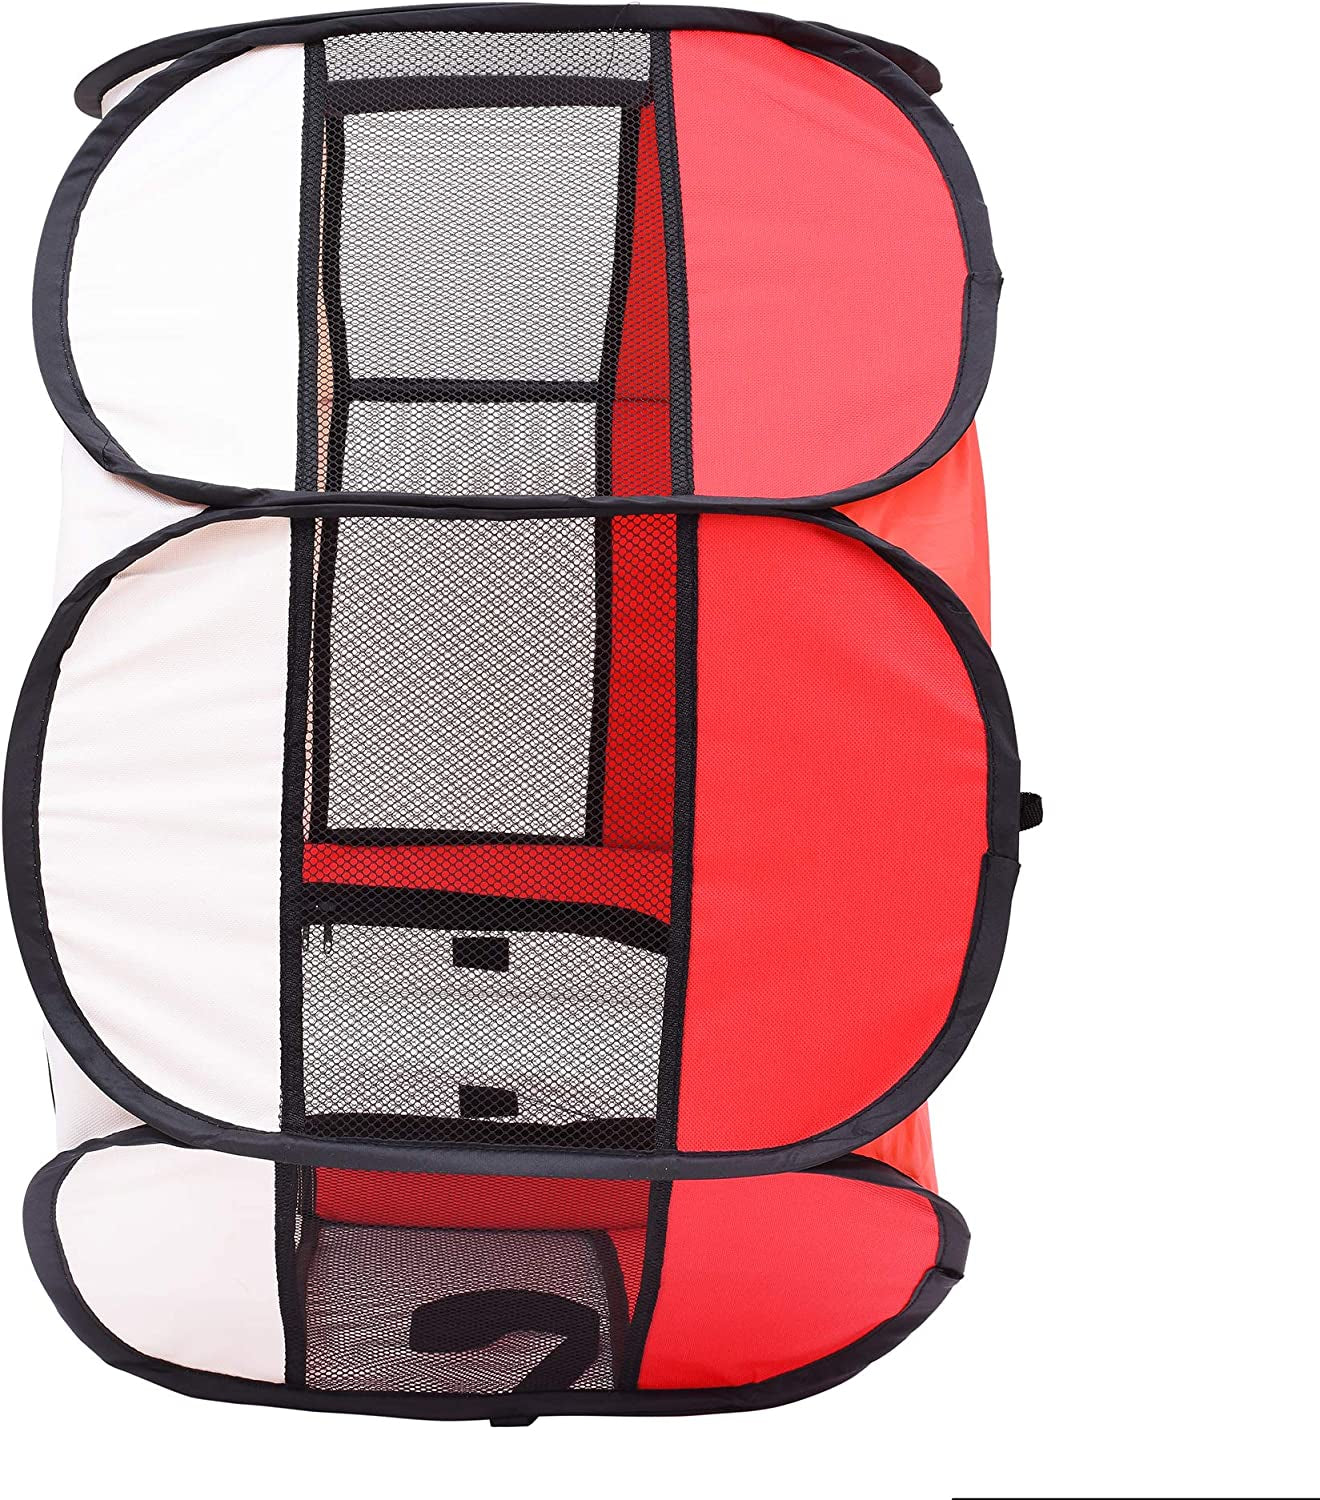 Mile High Life | Foldable Dog Playpen | Portable Dog Crate W Removable Shade Cover | Dog Kennel Indoor/Outdoor W Carry Case | Pen Tent for Dog/Cat/Rabbit(Red, Small (29"X29"*17"))